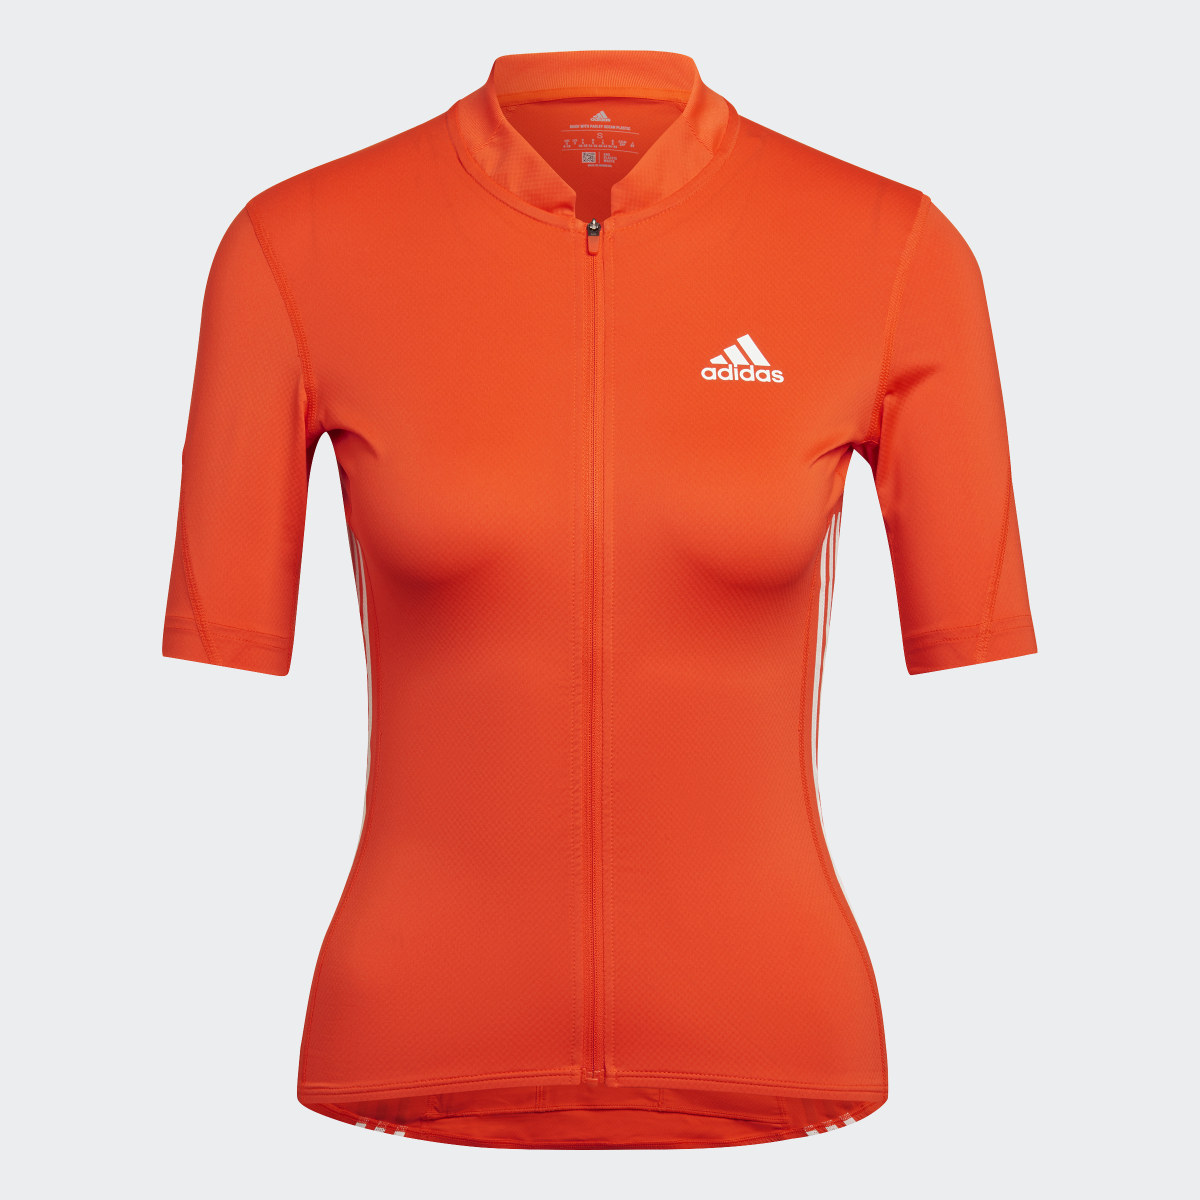 Adidas The Short Sleeve Cycling Jersey. 5